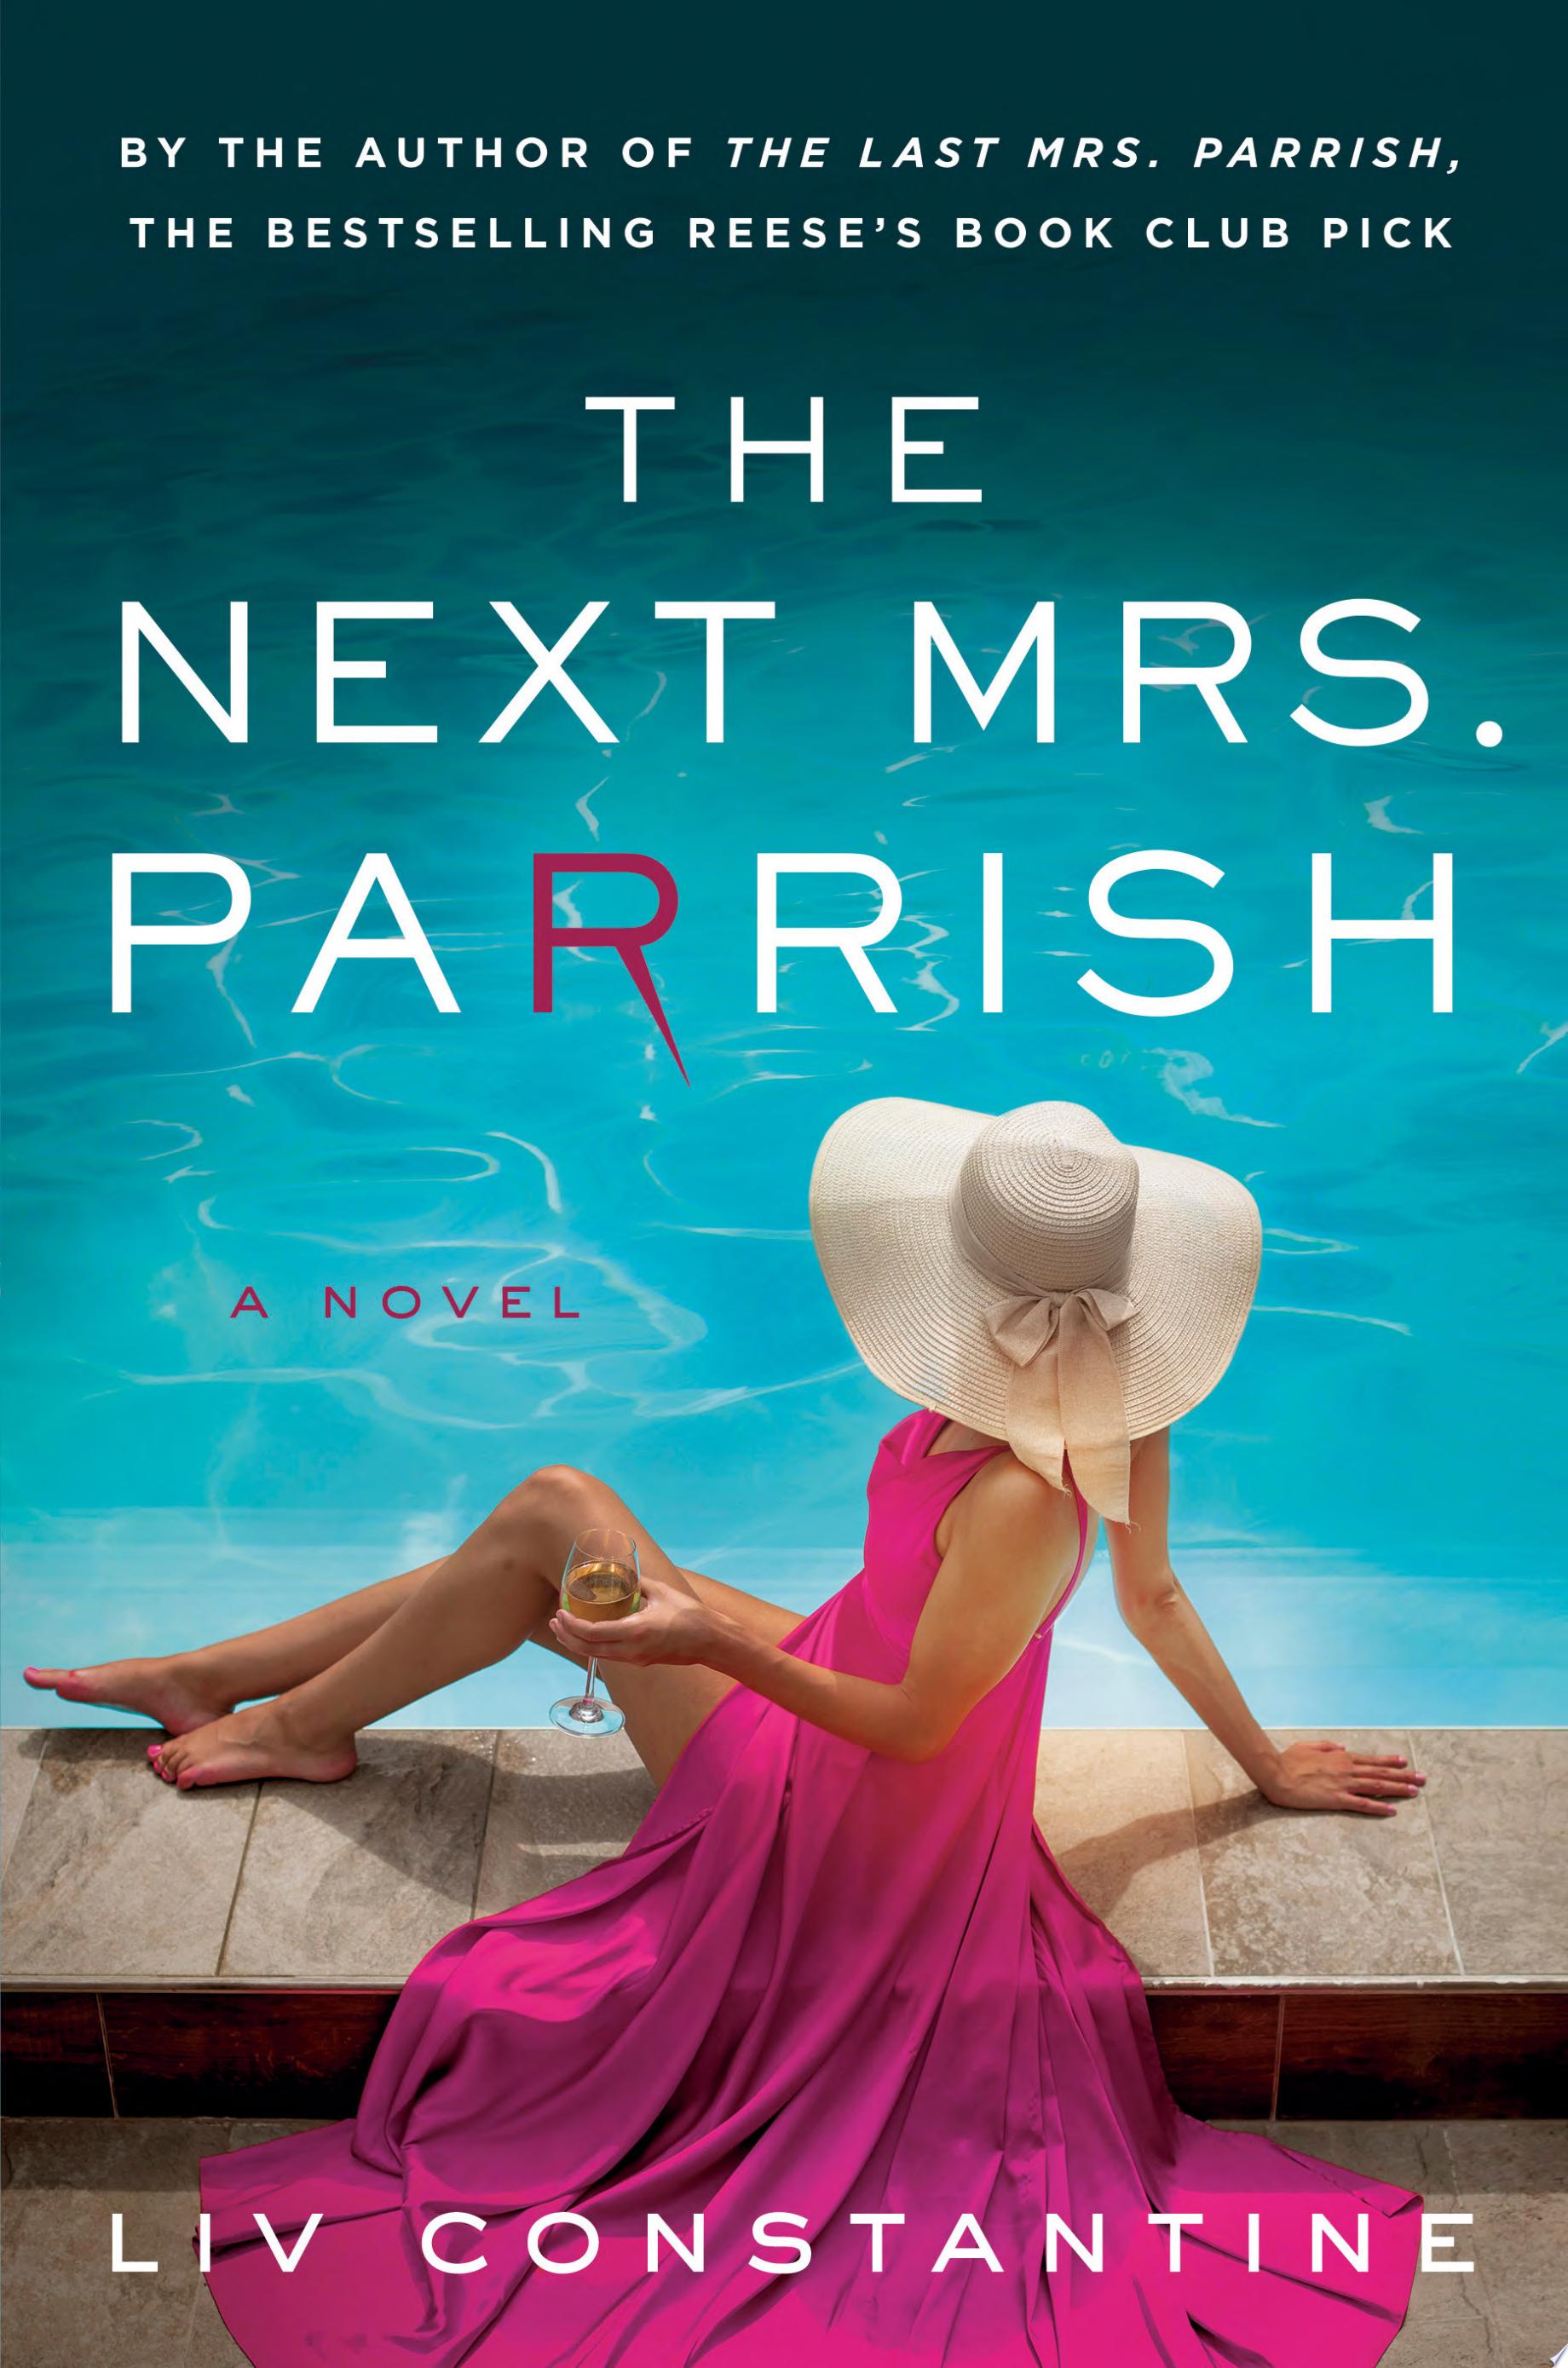 Image for "The Next Mrs. Parrish"